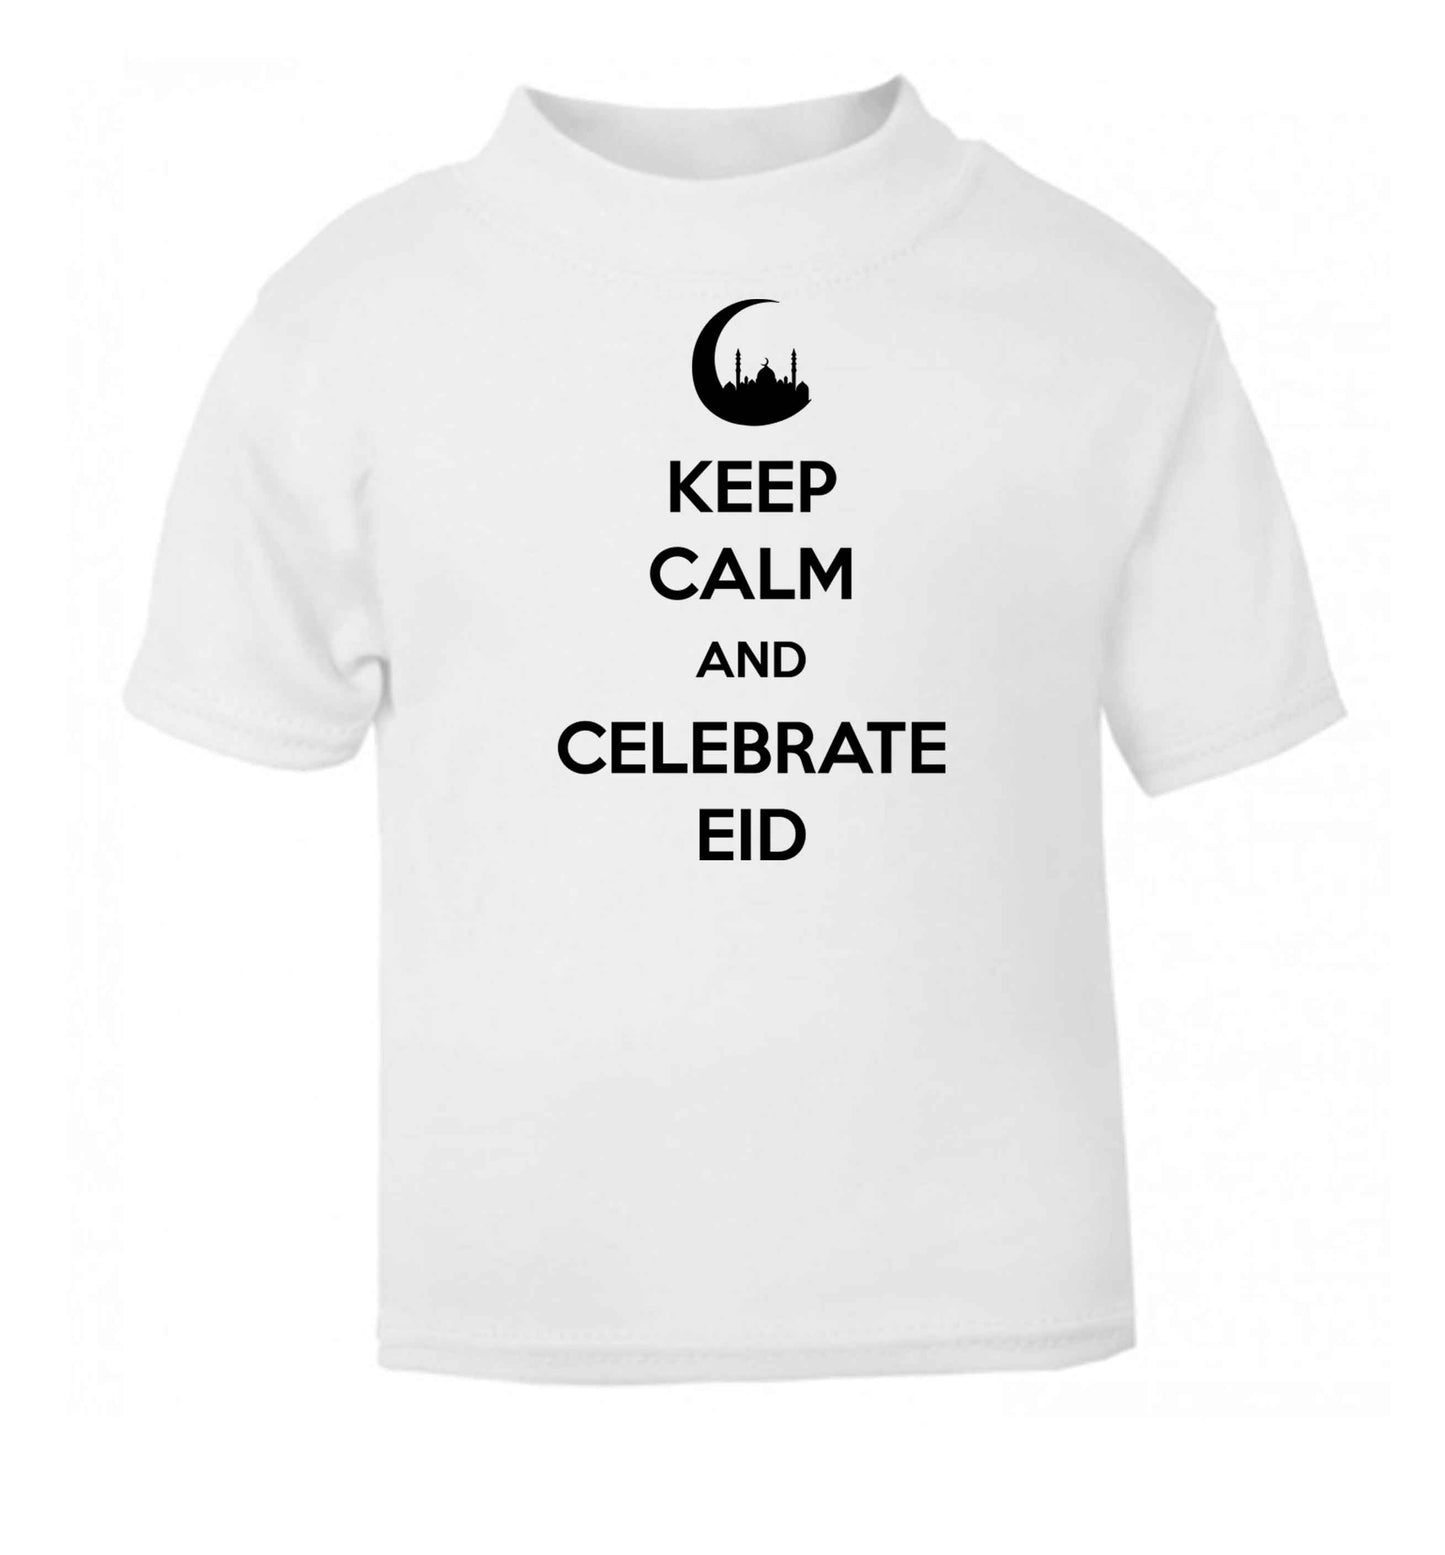 Keep calm and celebrate Eid white baby toddler Tshirt 2 Years